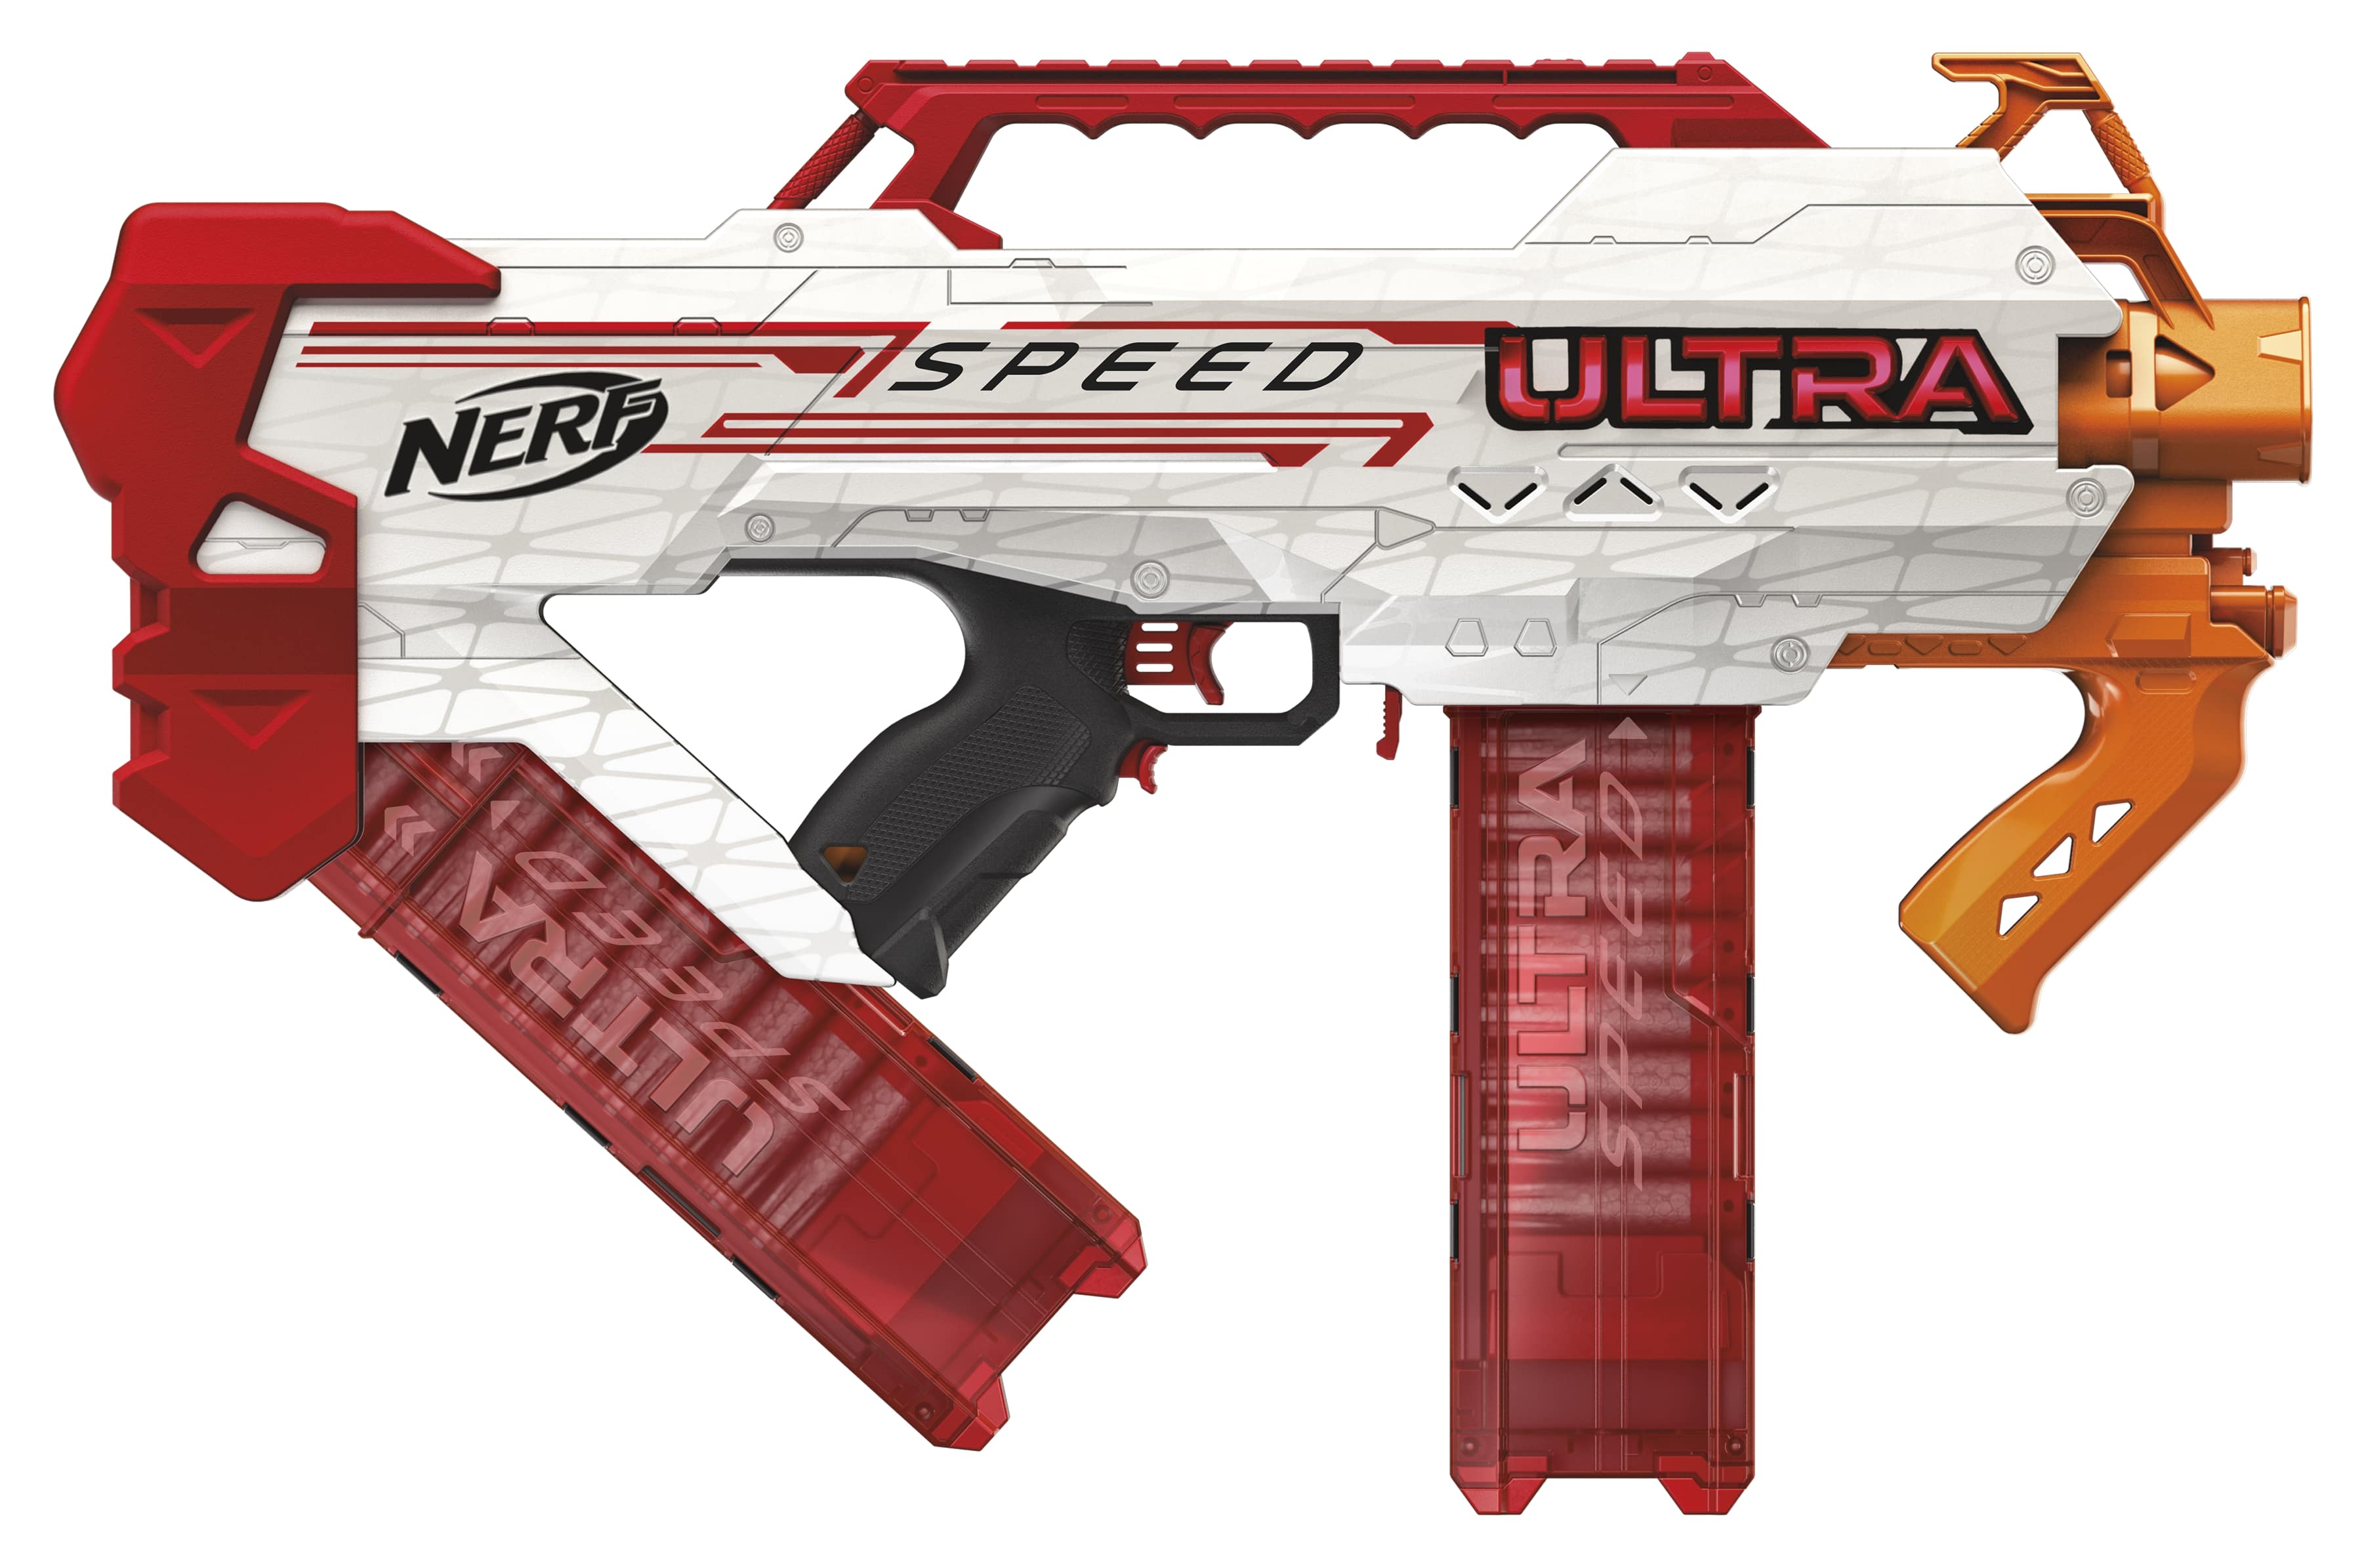 Recently Hasbro released some new images of Nerf Mania, their Nerf